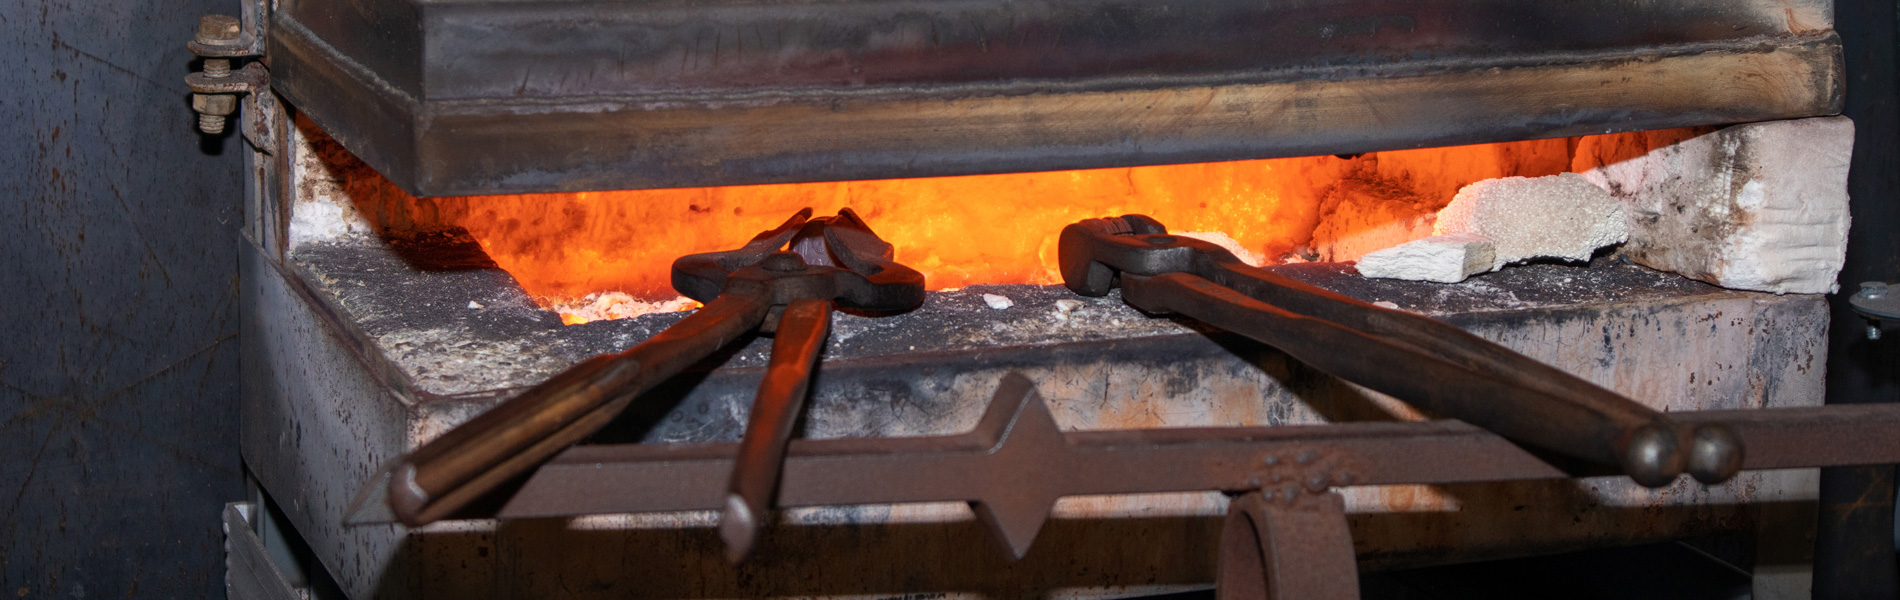 Metalsmithing tools heating up in a fire,